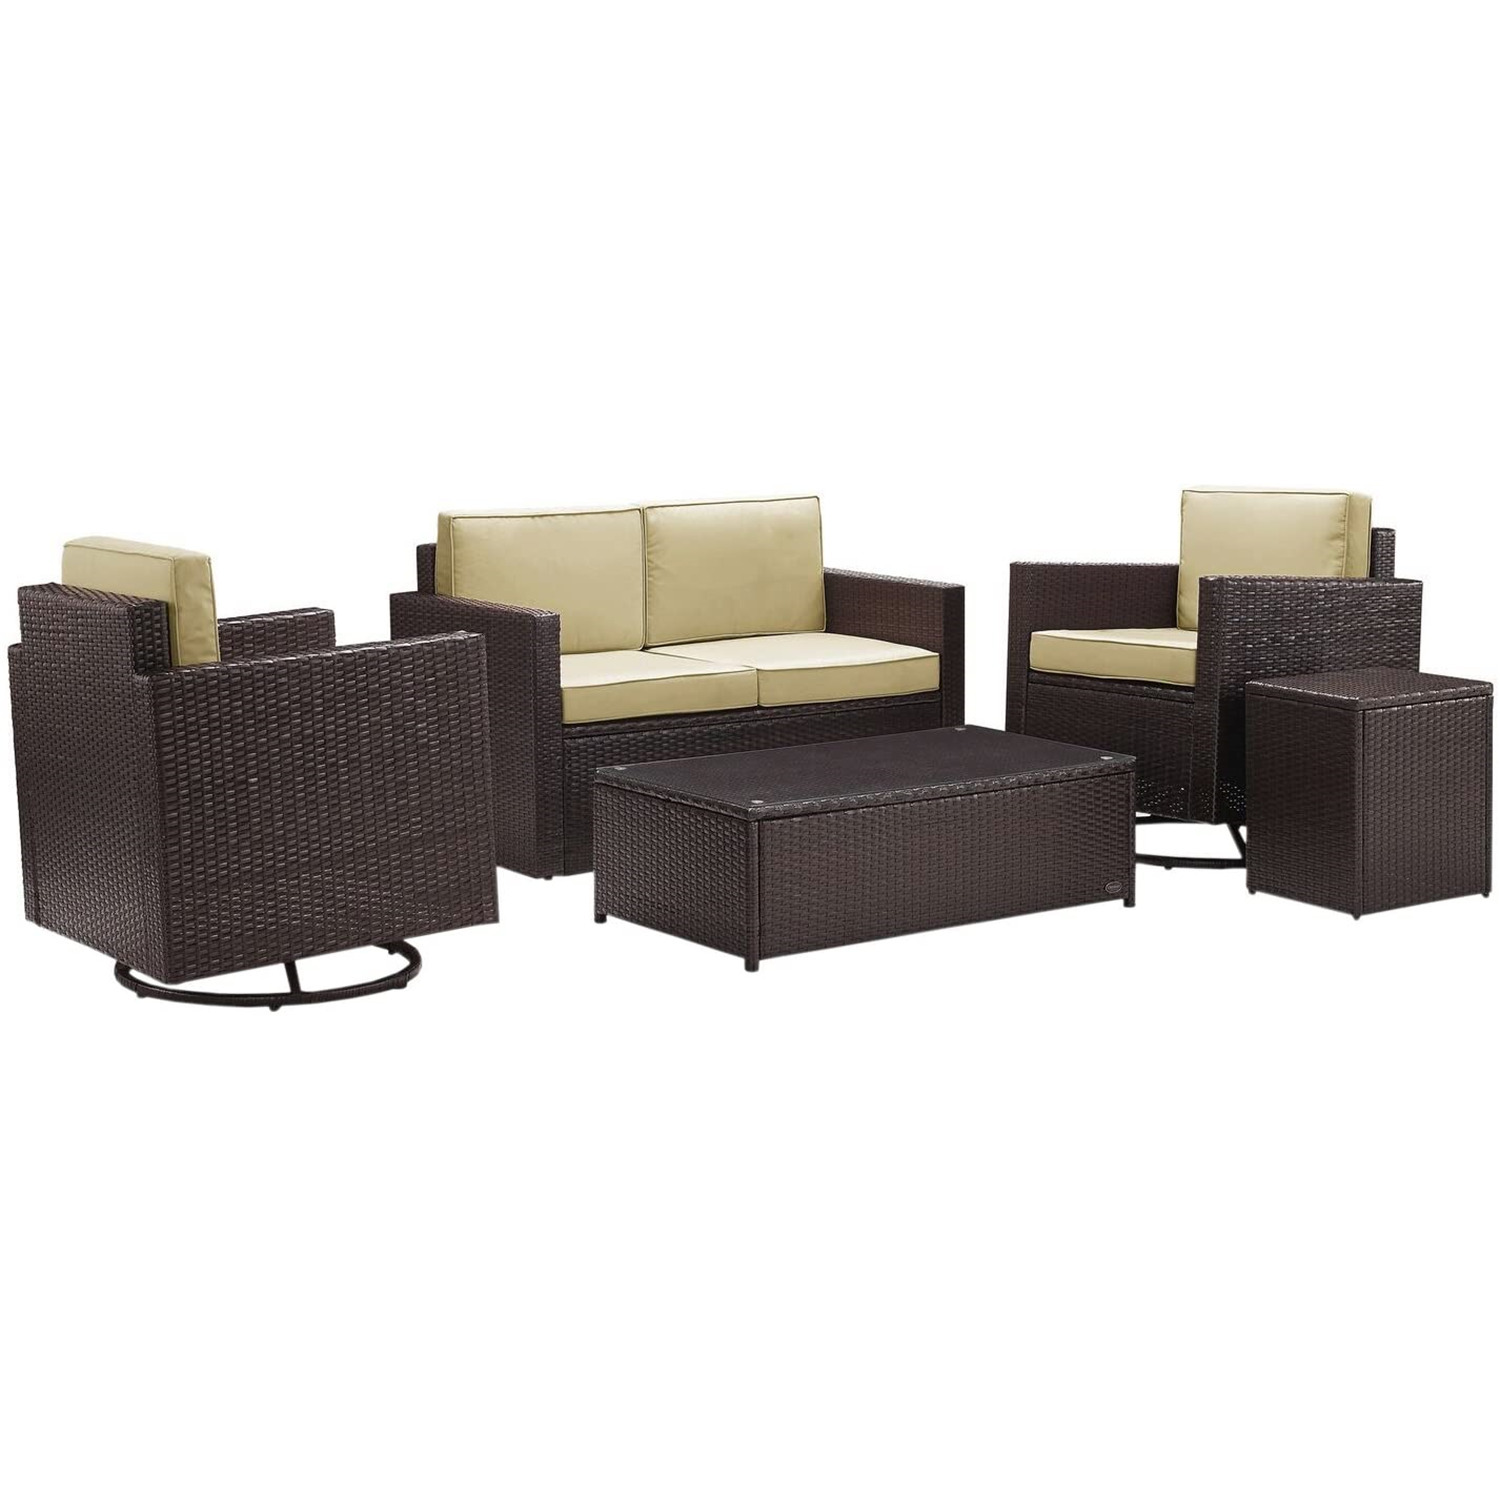 Crosley Palm Harbor 5 Piece Wicker Patio Sofa Set in Brown and Sand - image 1 of 3